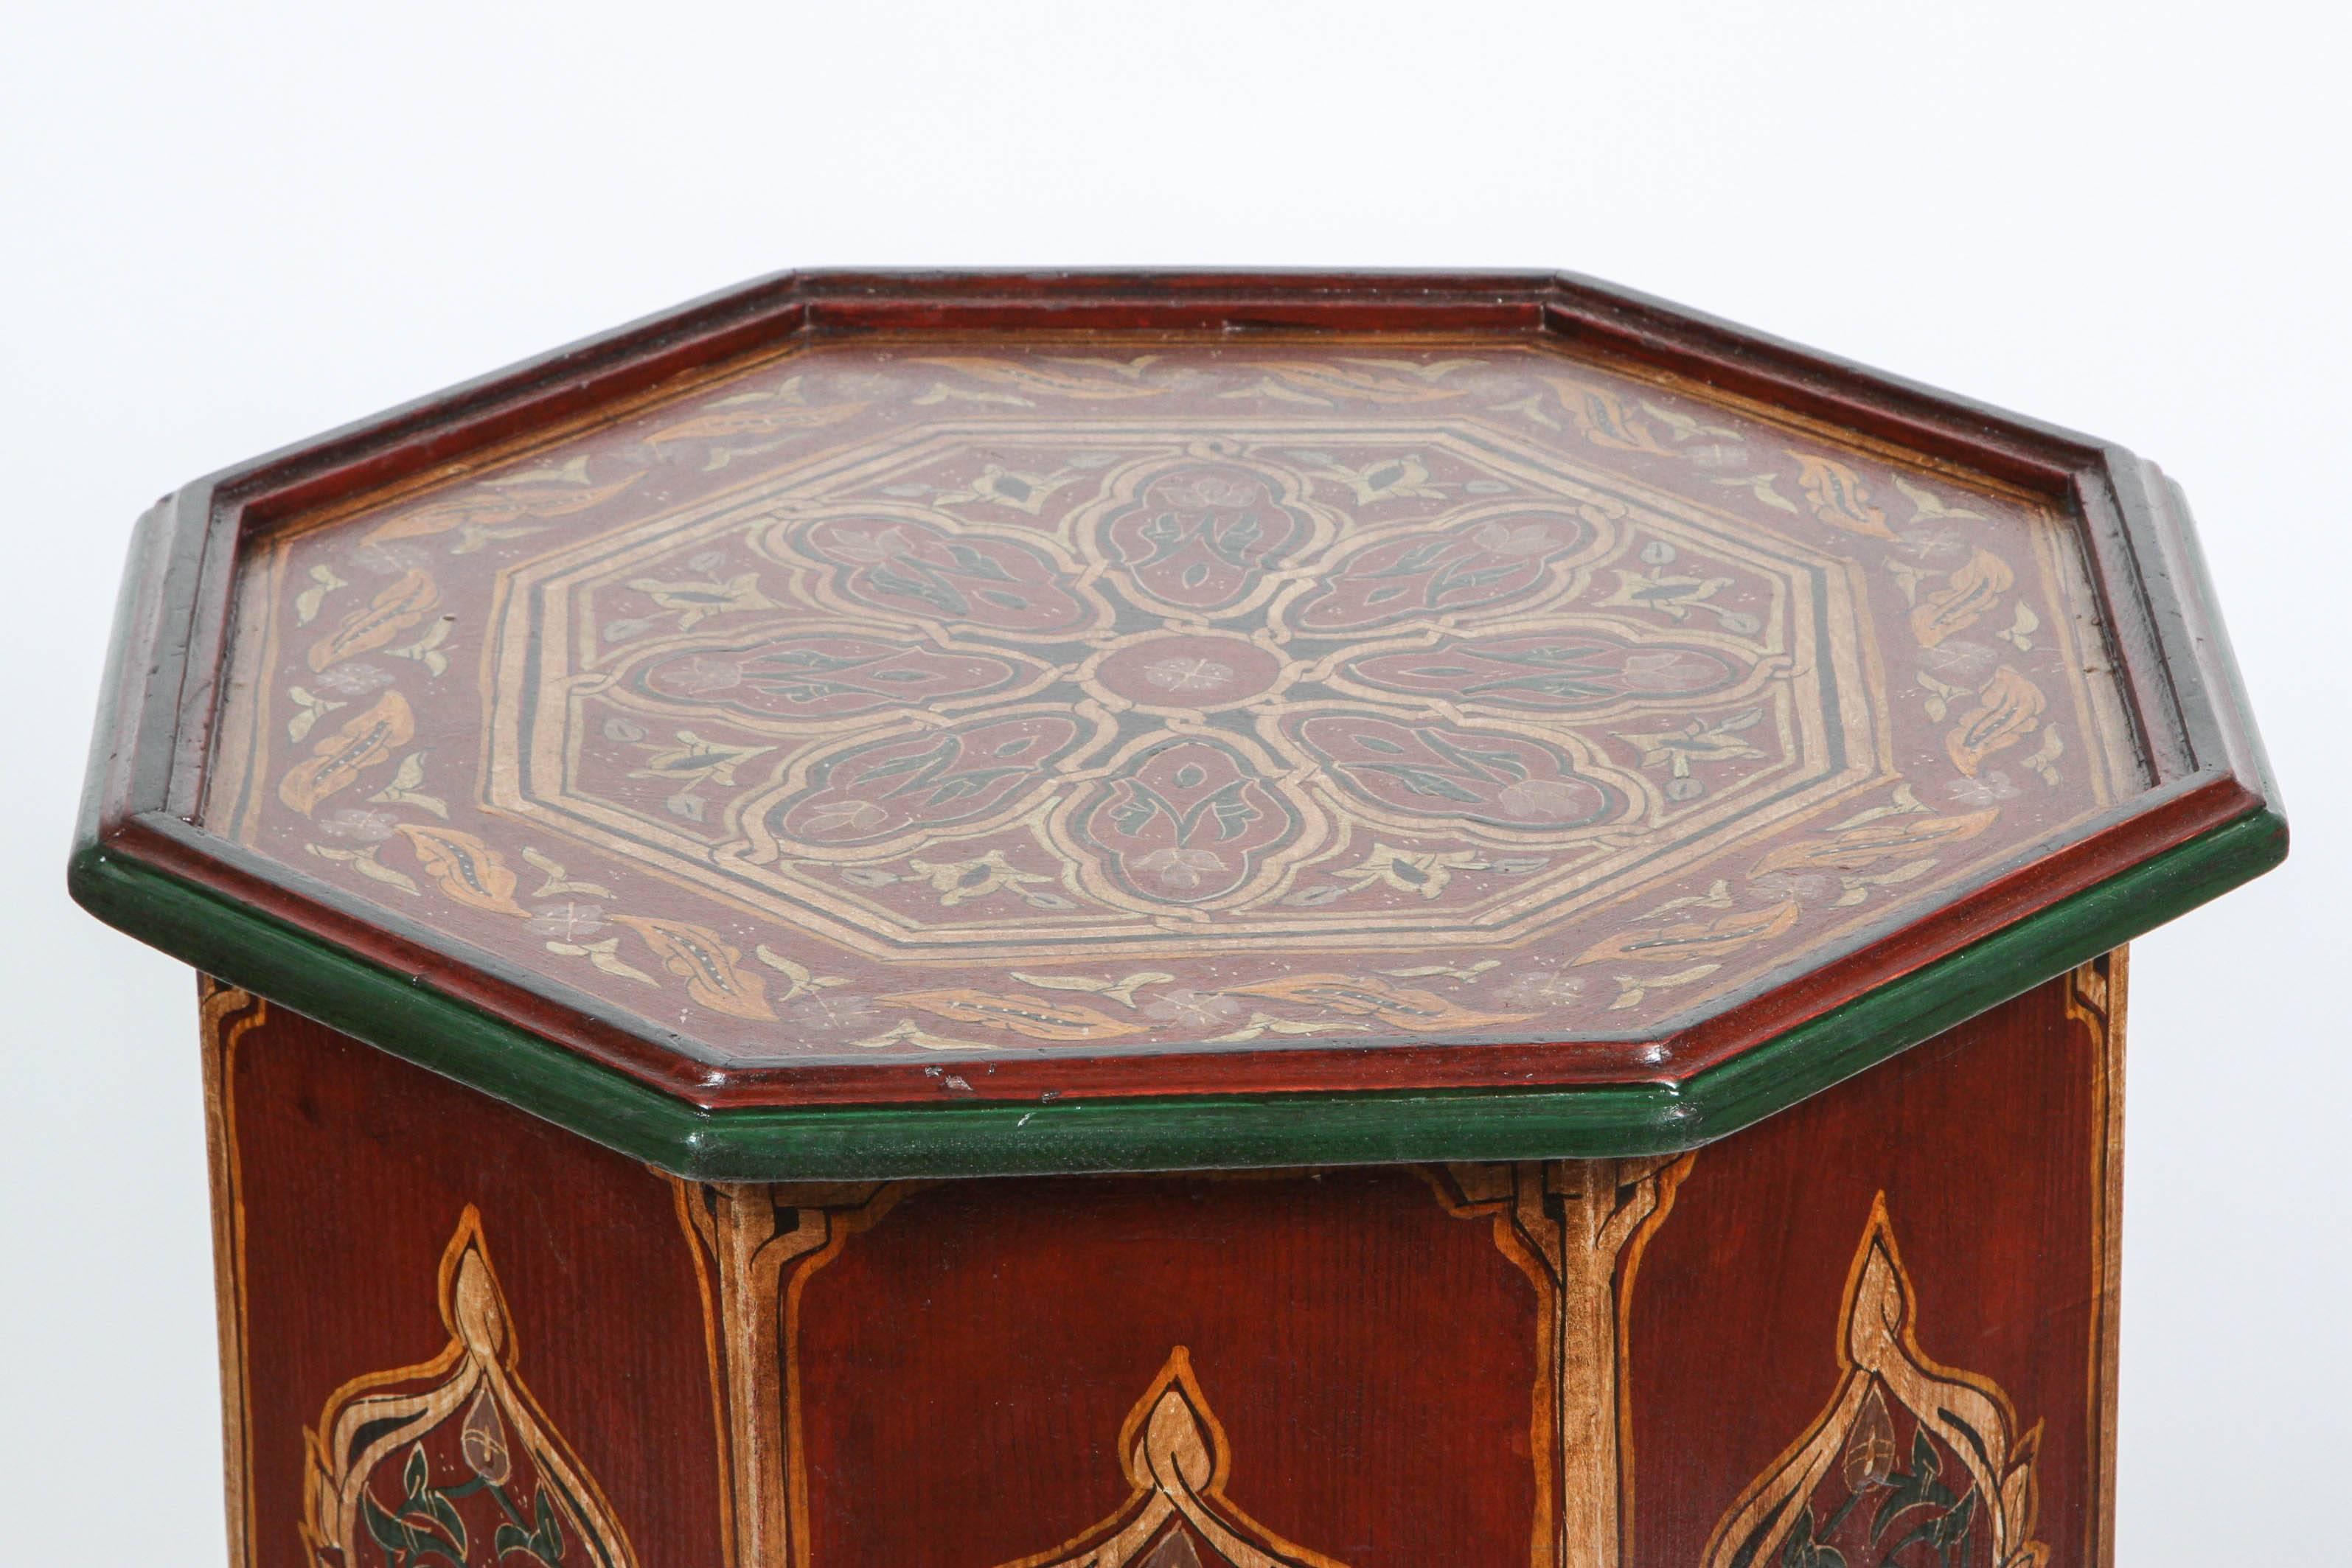 Hand-Crafted Moroccan Side Tables with Moorish Designs, Pair